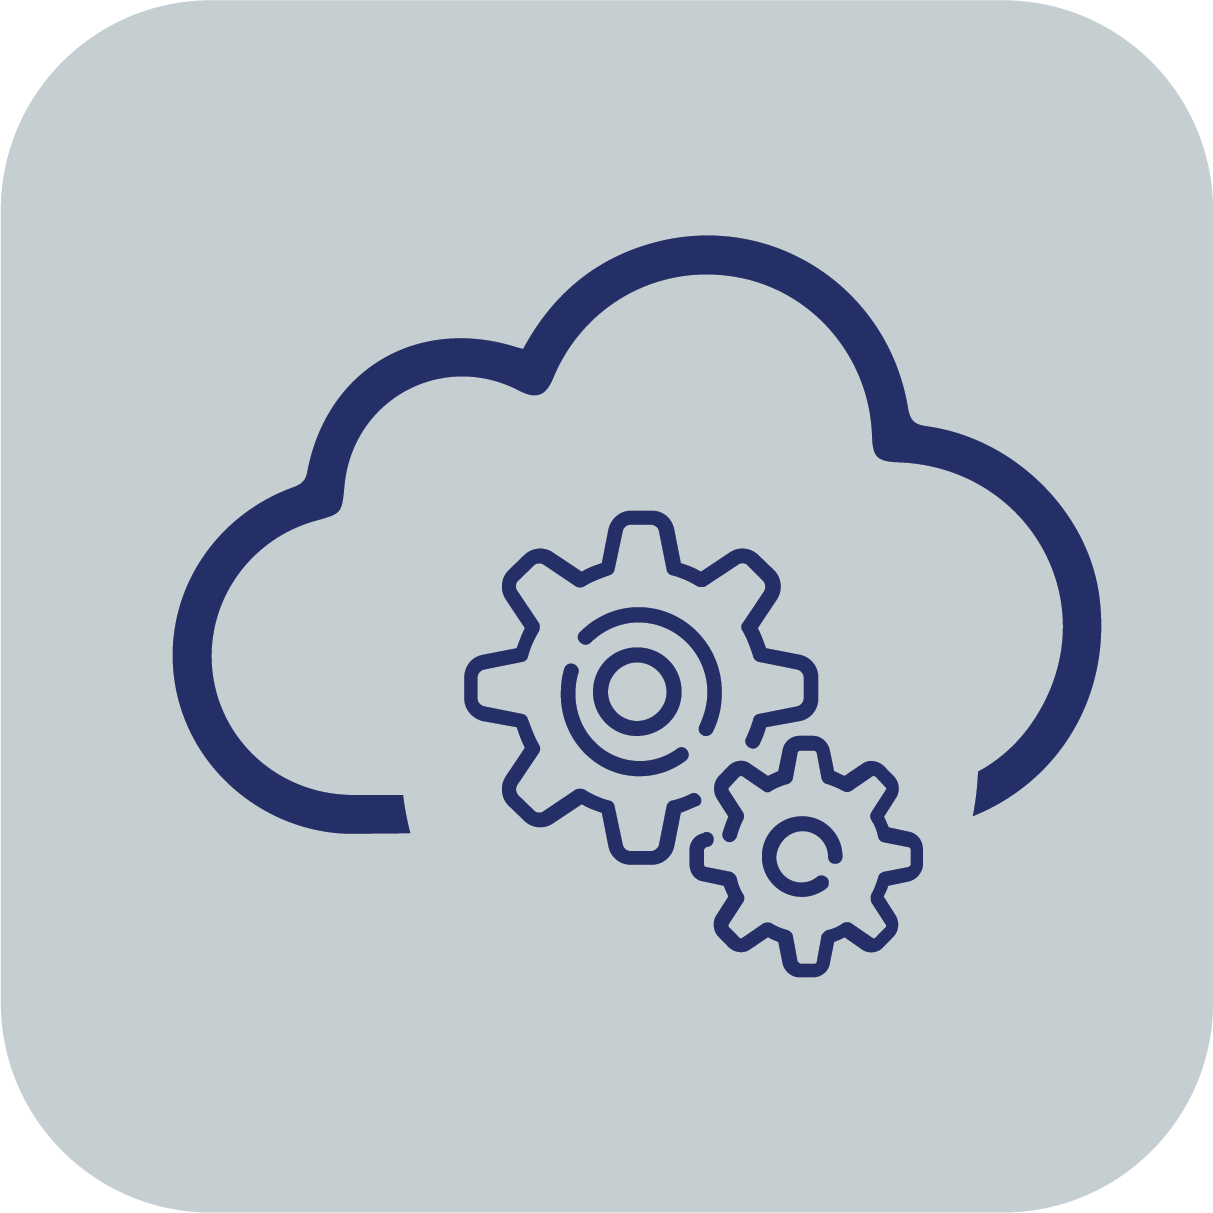 Button to access Cloud Management service page. Icon shows a cloud with gears inside